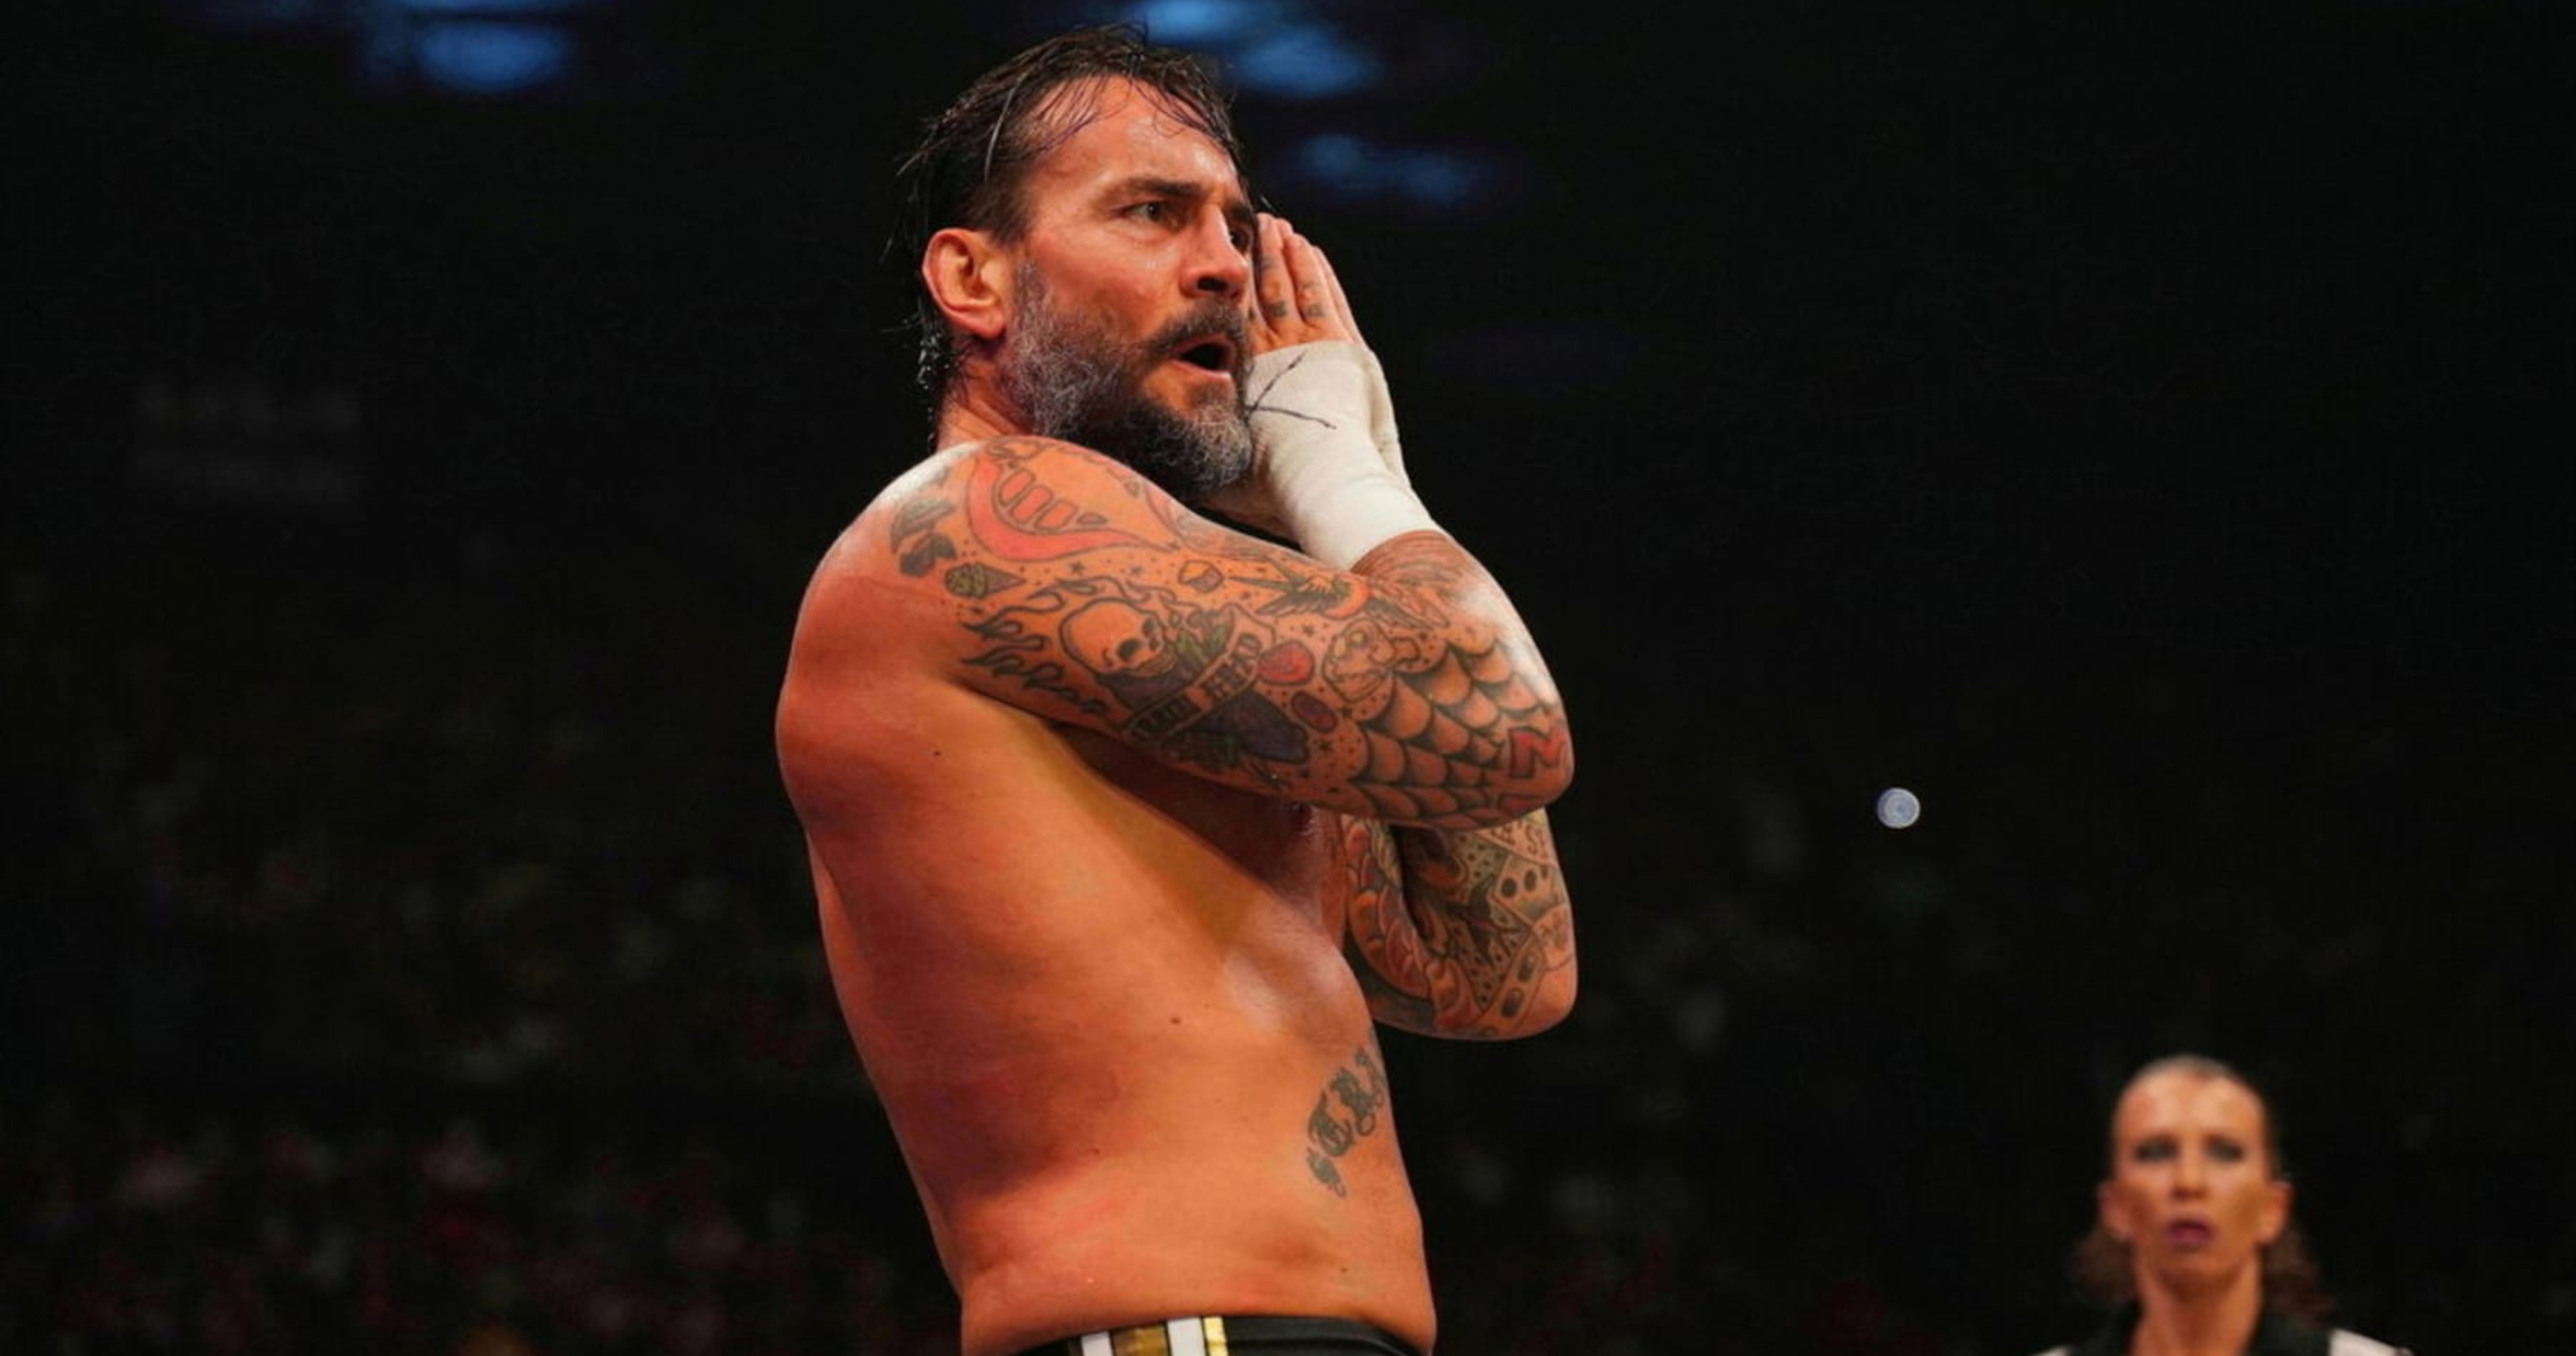 Backstage Wwe And Aew Rumors Latest On Cm Punk Wrestlemania 40 And More News Scores 